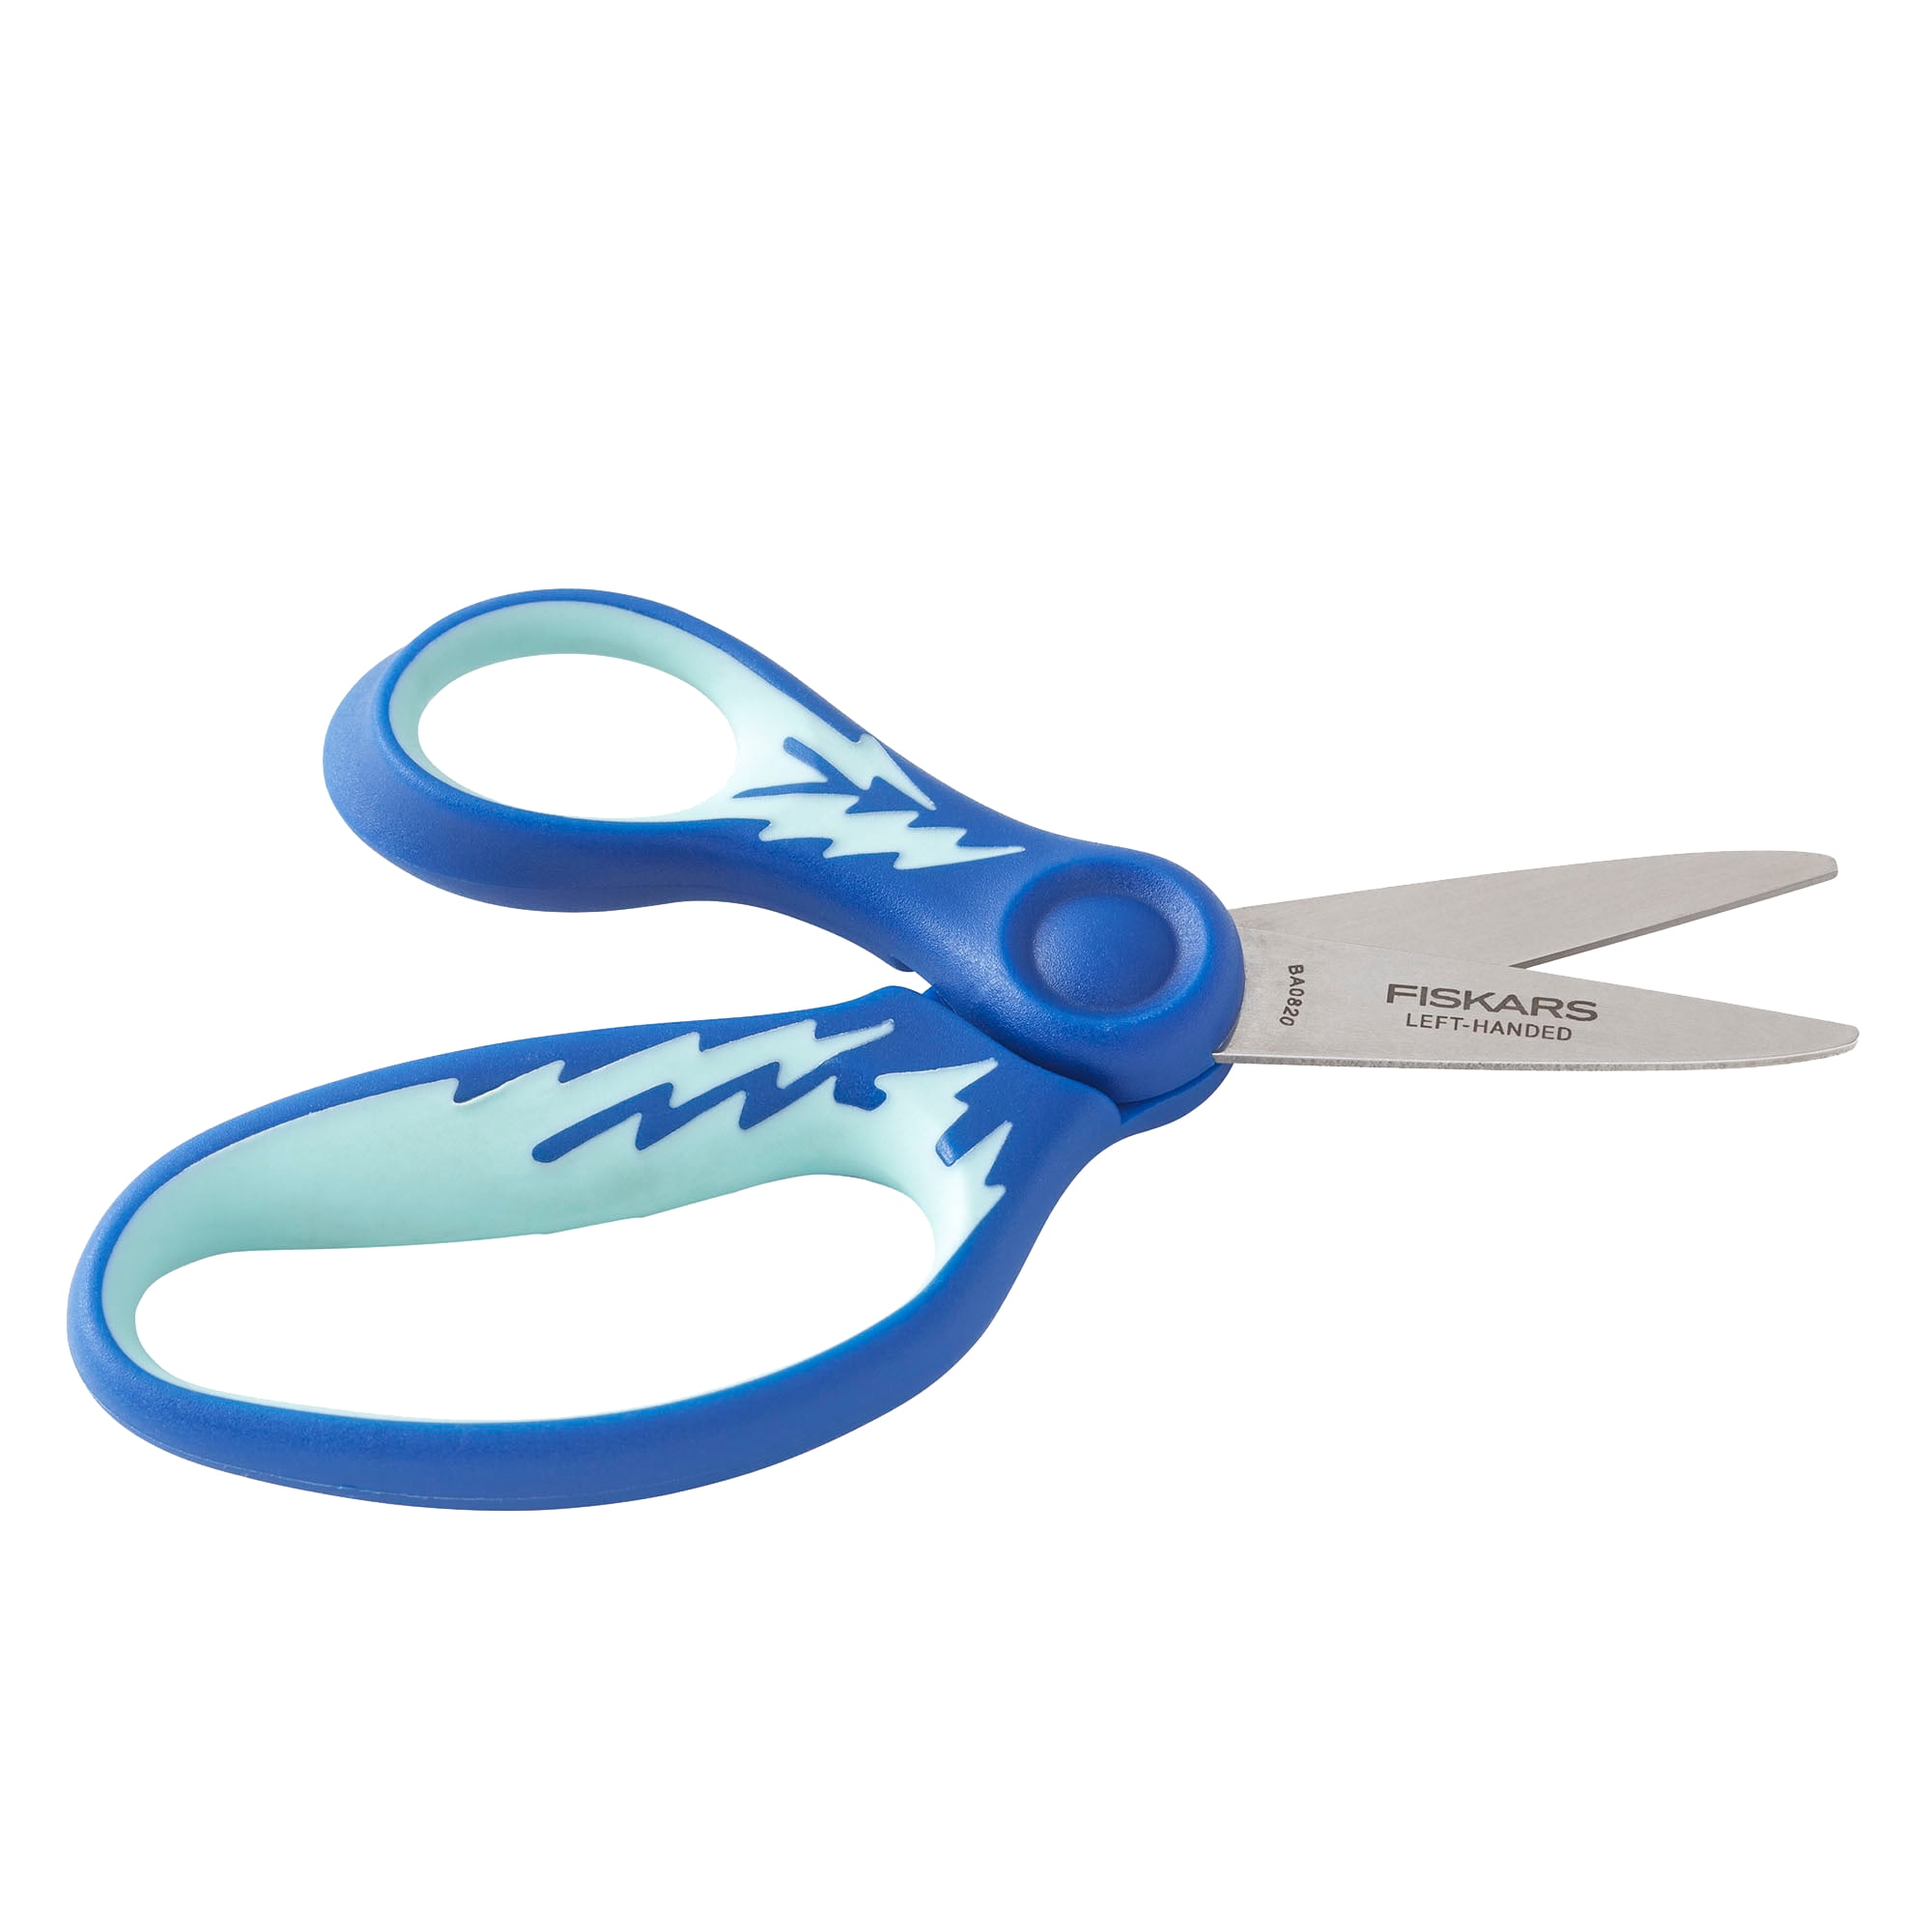 ELECKEY Left Handed Scissors for Kids 5.75,Lefty Soft Touch